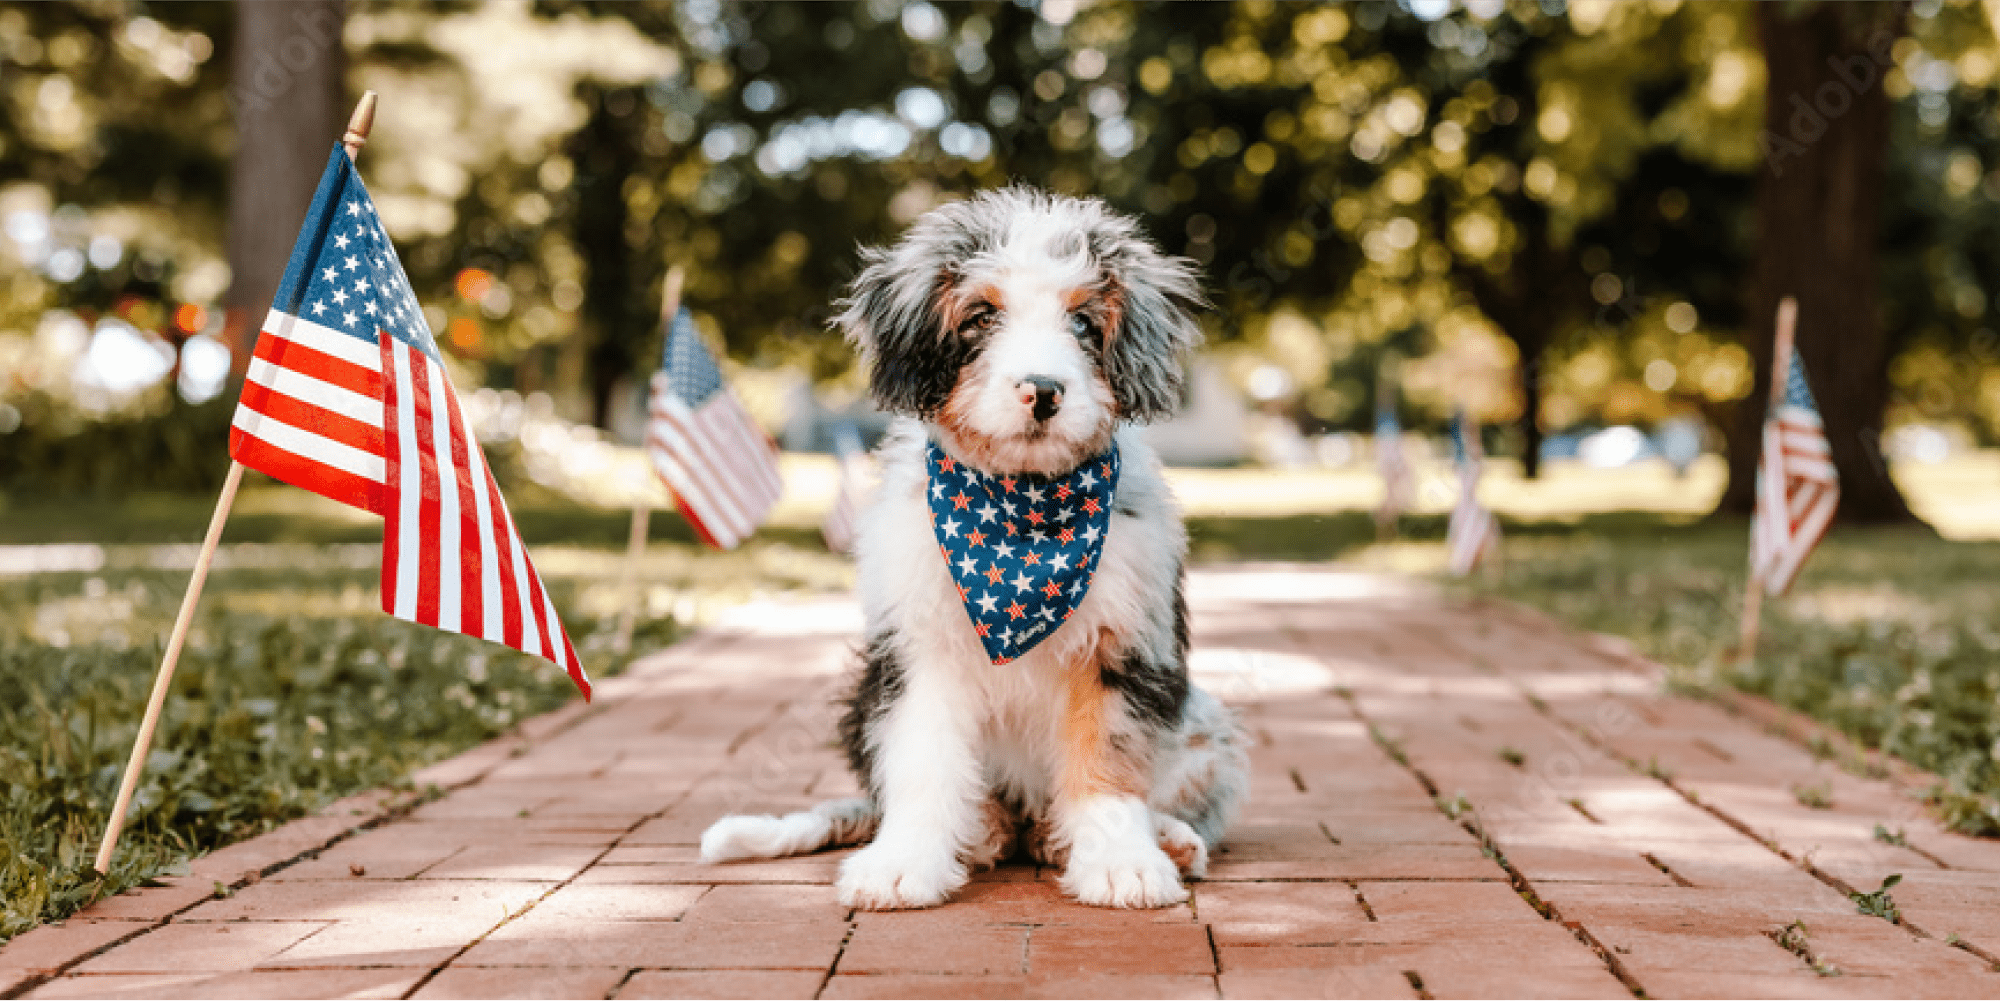 Celebrate July 4th Safely with your Dog - Whistle